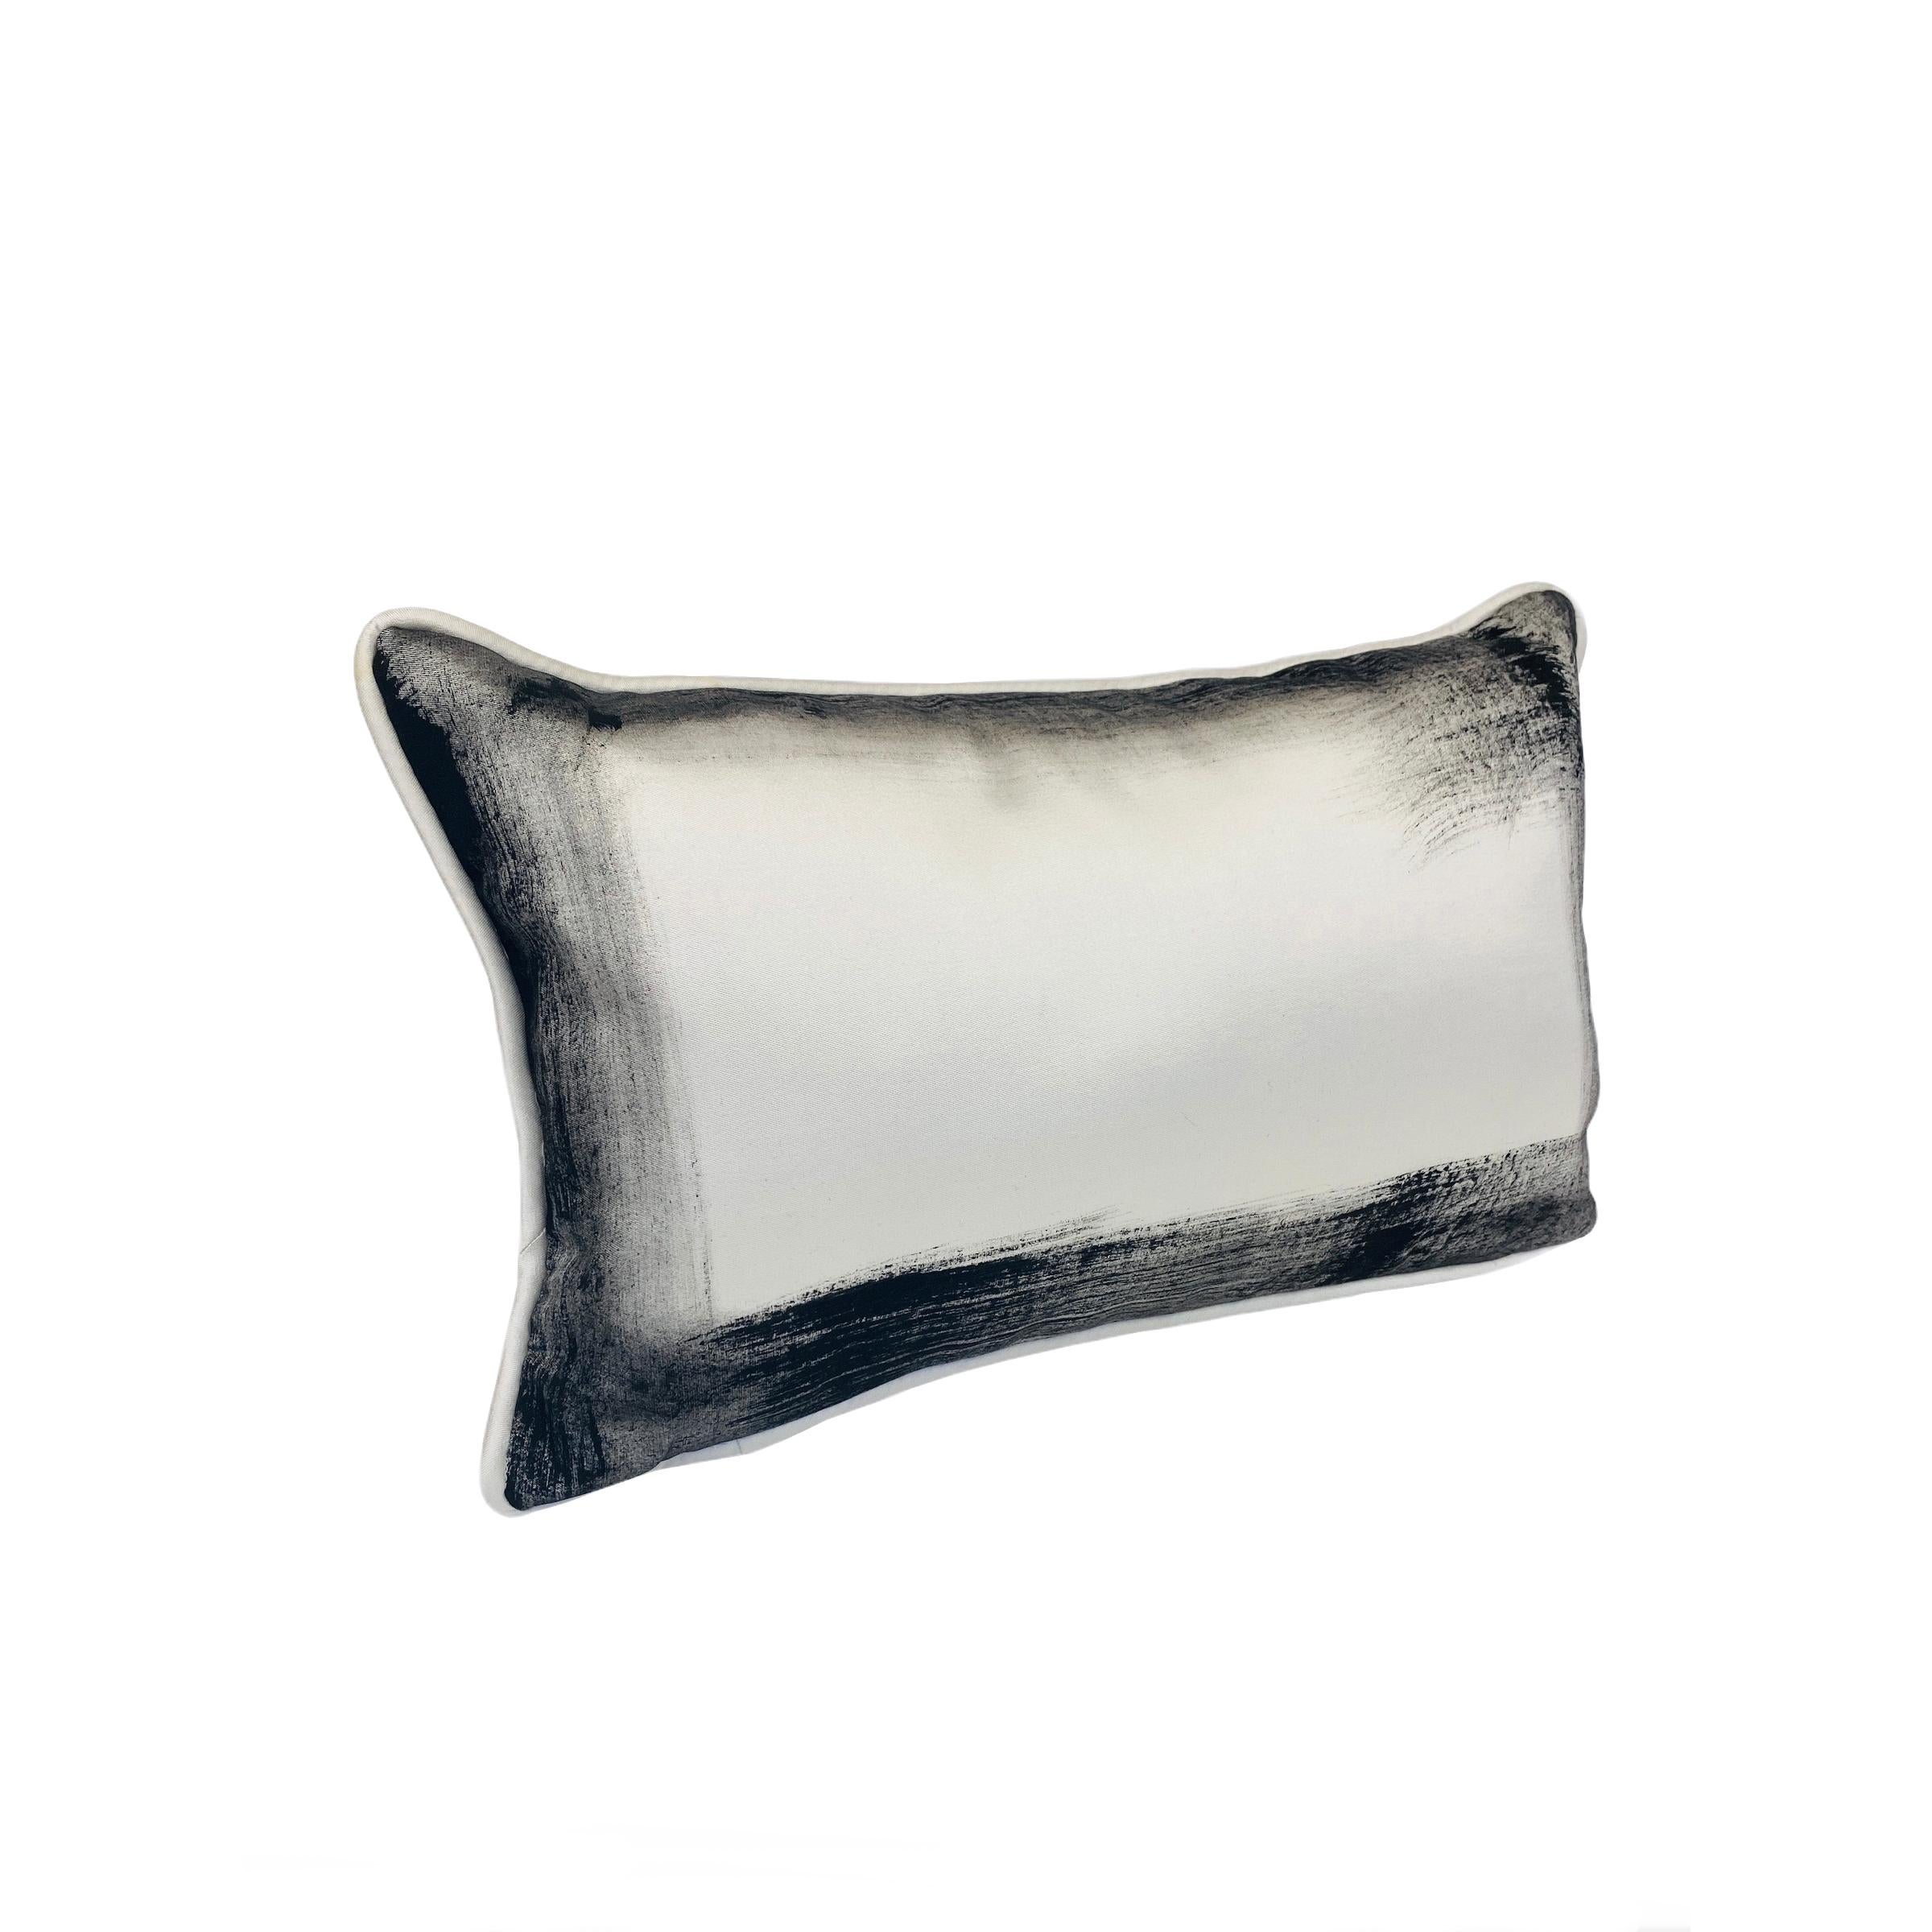 American Off-White Contemporary Delicately Hand-Painted Black-Edged Throw Pillows For Sale